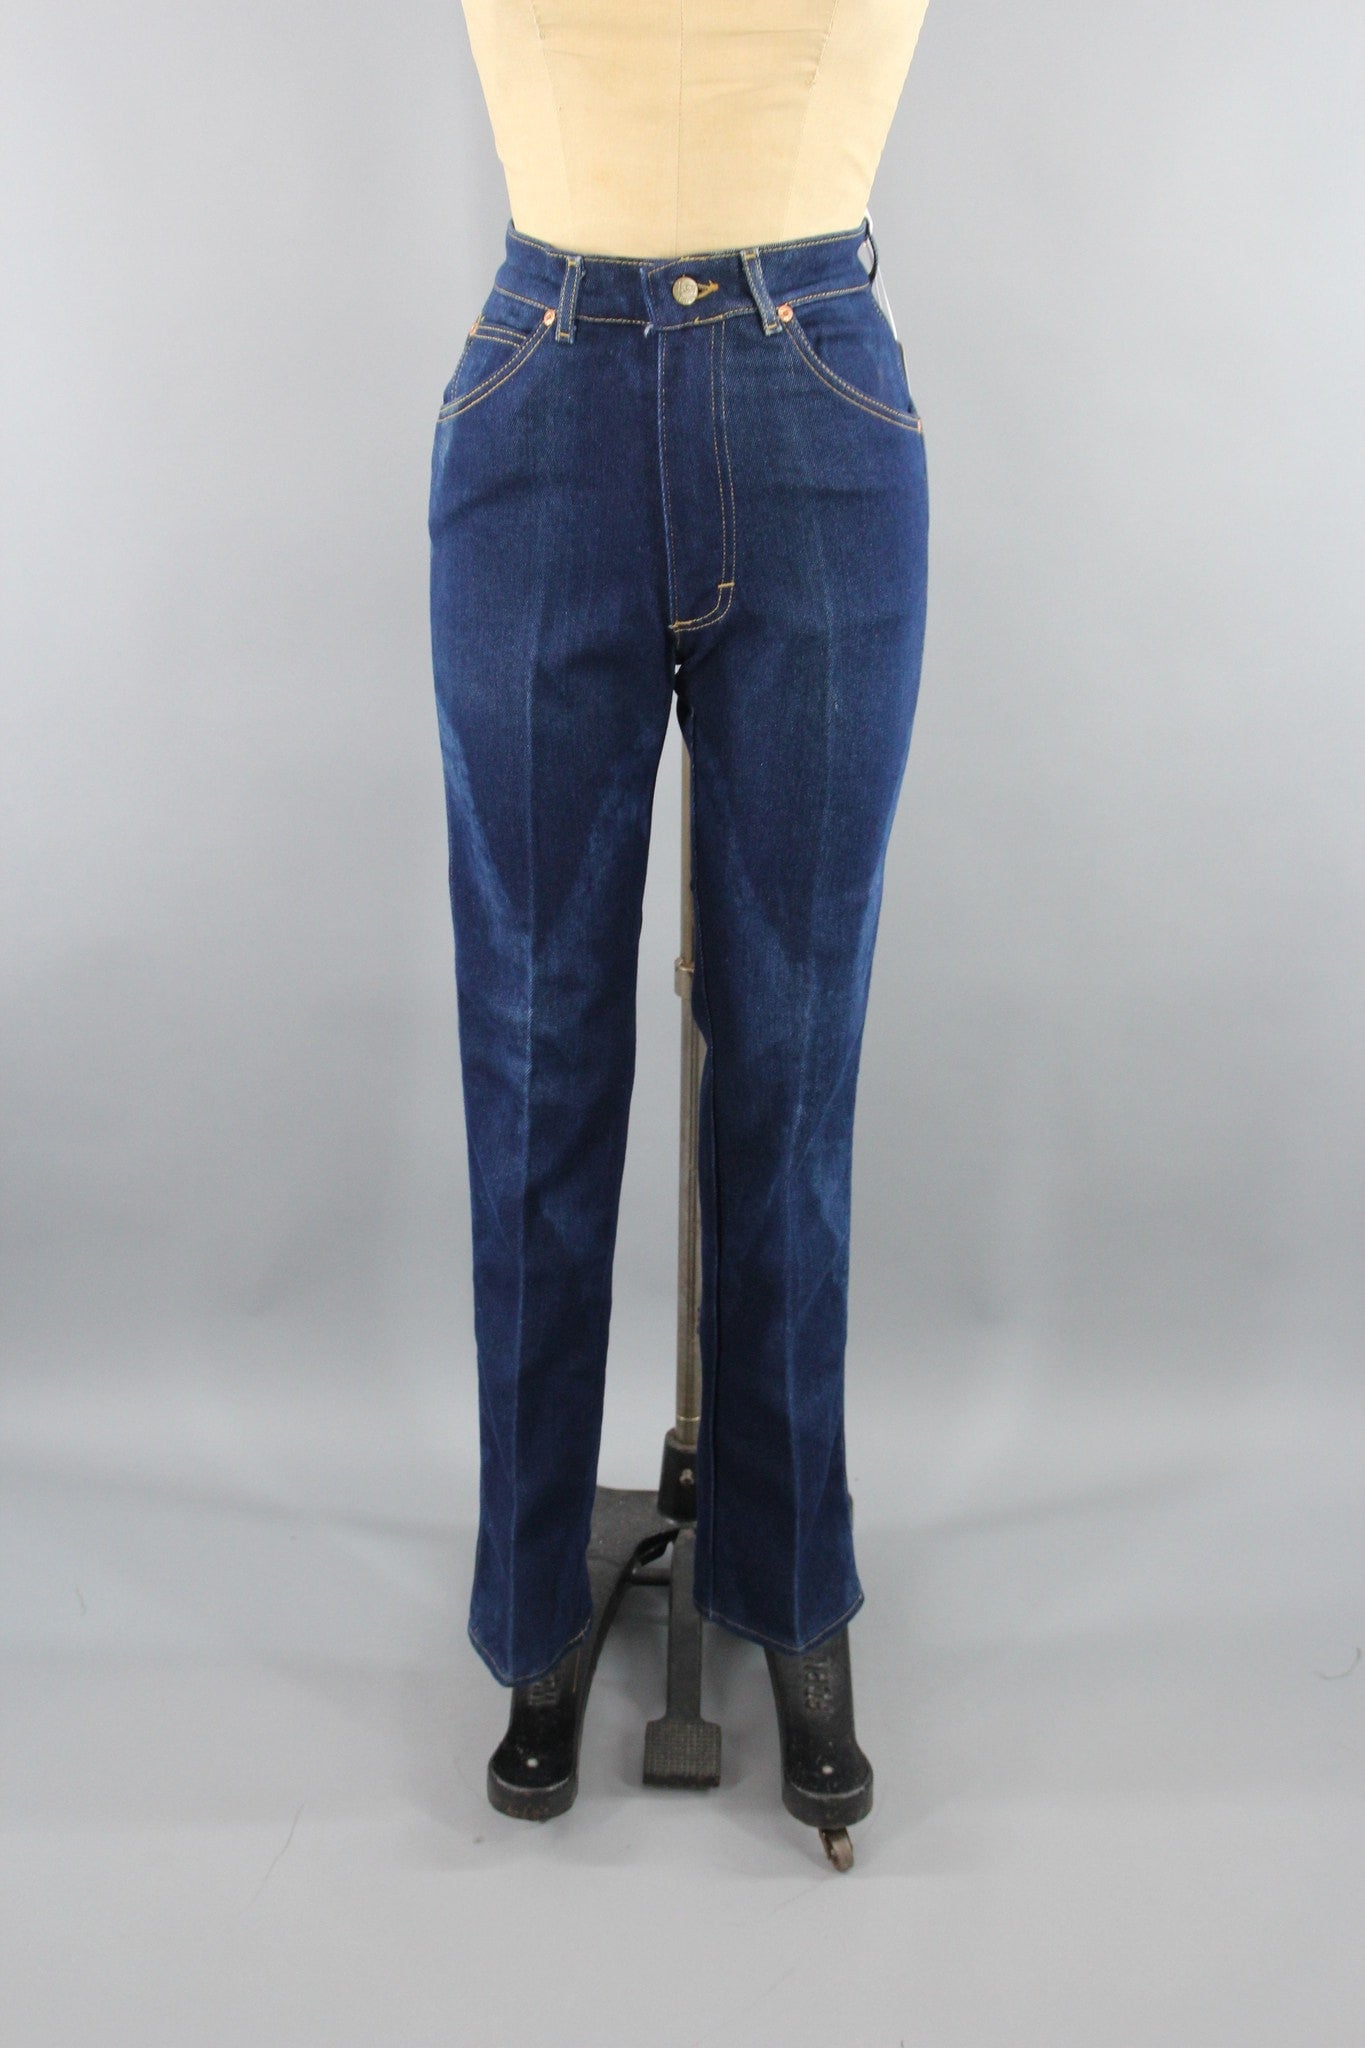 Vintage 1980s Deadstock Ms. Lee High Waisted Jeans - ThisBlueBird